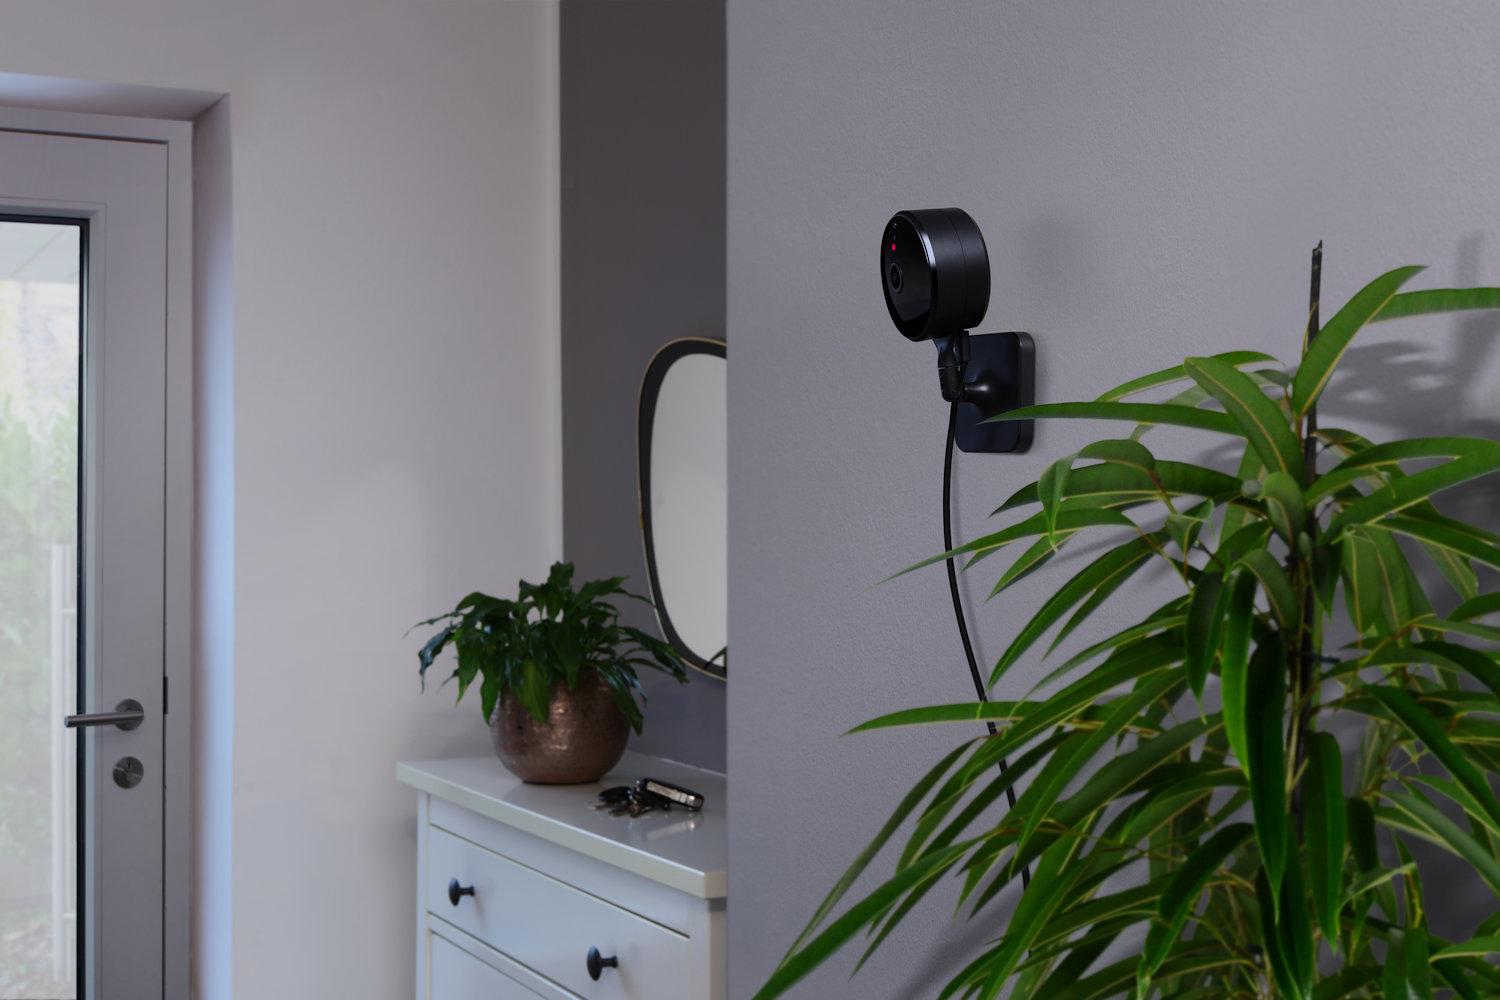 6 Best HomeKit Cameras for Safeguarding Your Home in a Smart Way